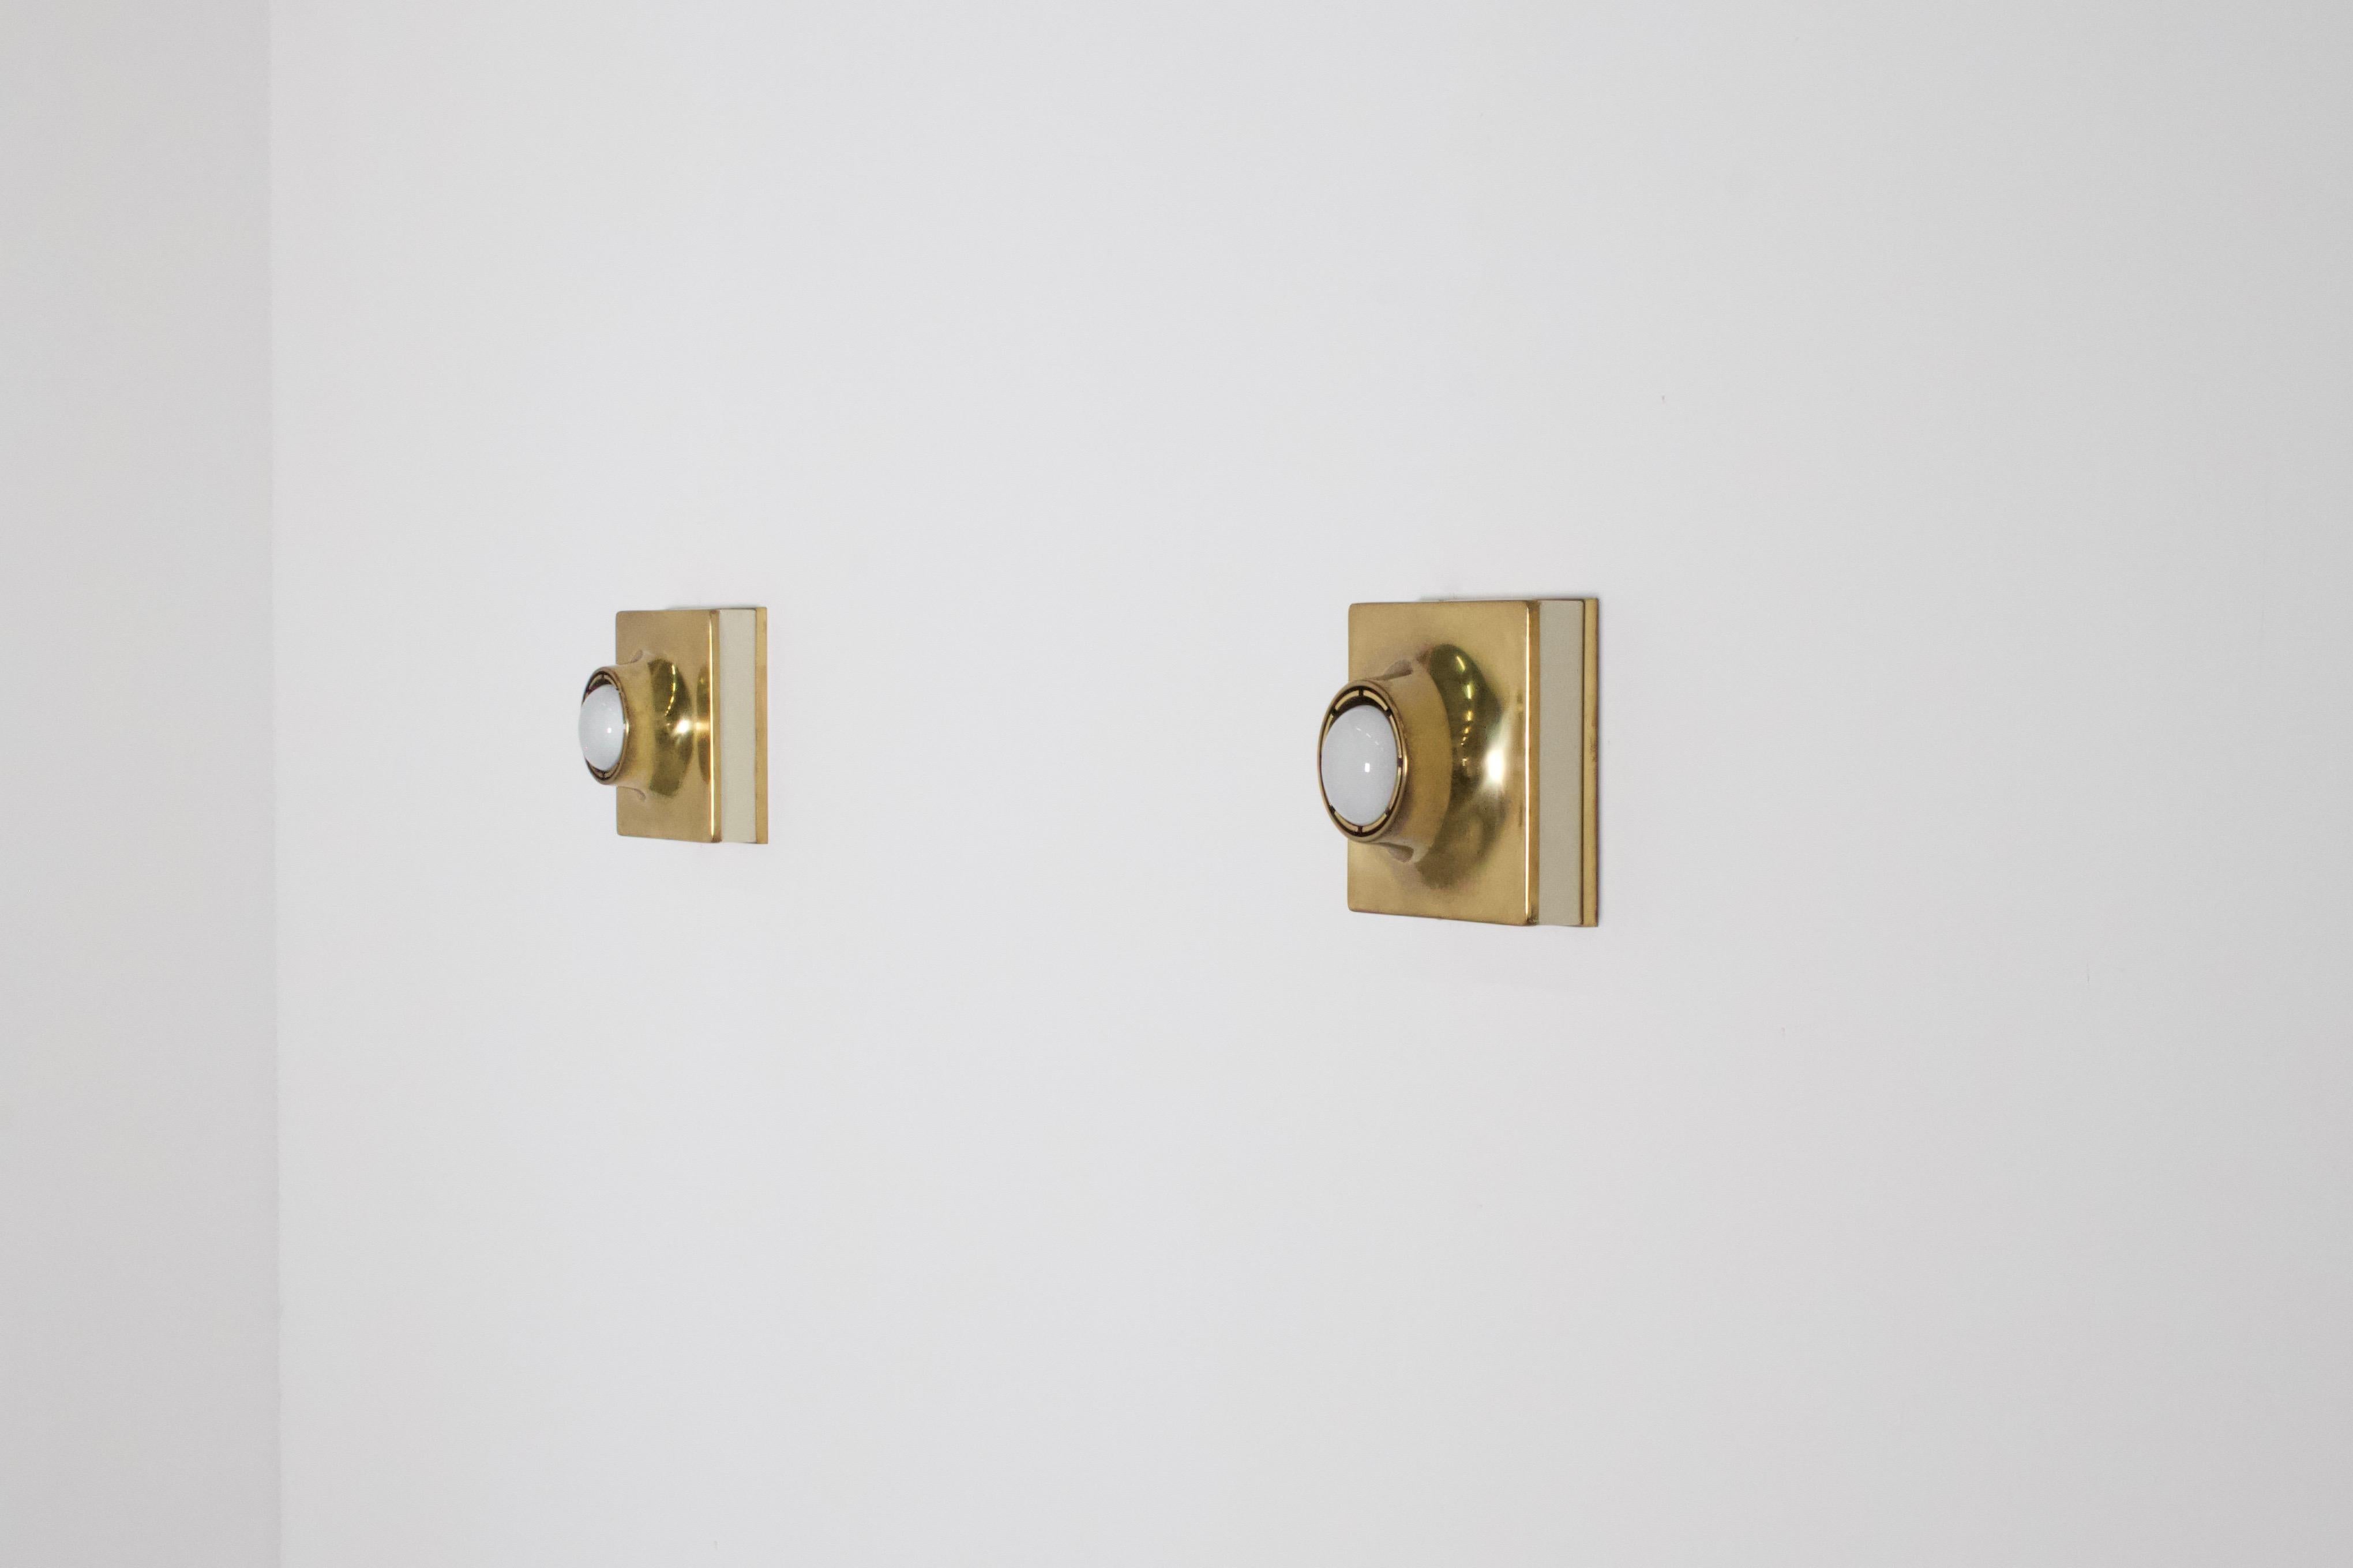 Rare high quality sconces / flush mounts in very good condition.

Manufactured in Italy, 1970s

4 available

The sconces are made of solid brass and white lacquered metal

They use one bulb up to 70 watts each and can be used as a flush mount or